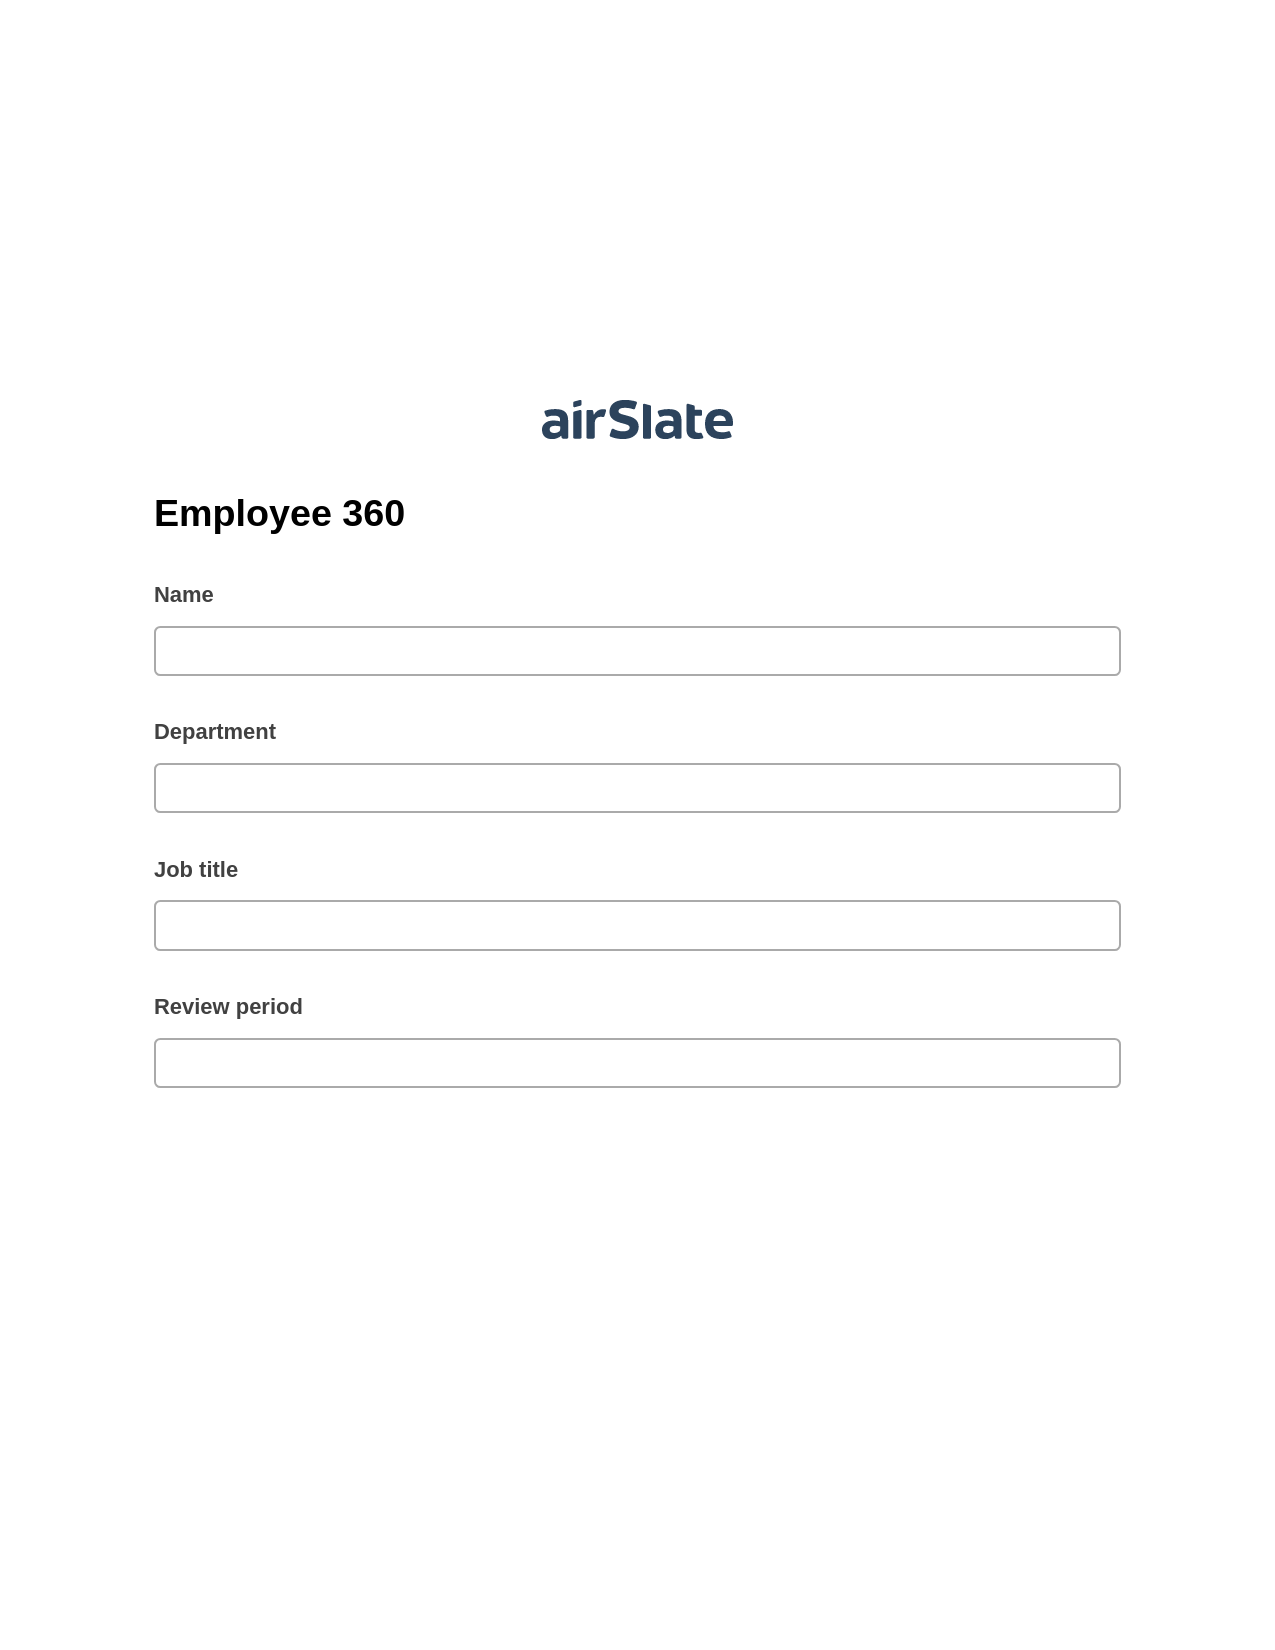 Employee 360 Prefill from NetSuite records, Export to MS Dynamics 365 Bot, Slack Two-Way Binding Bot